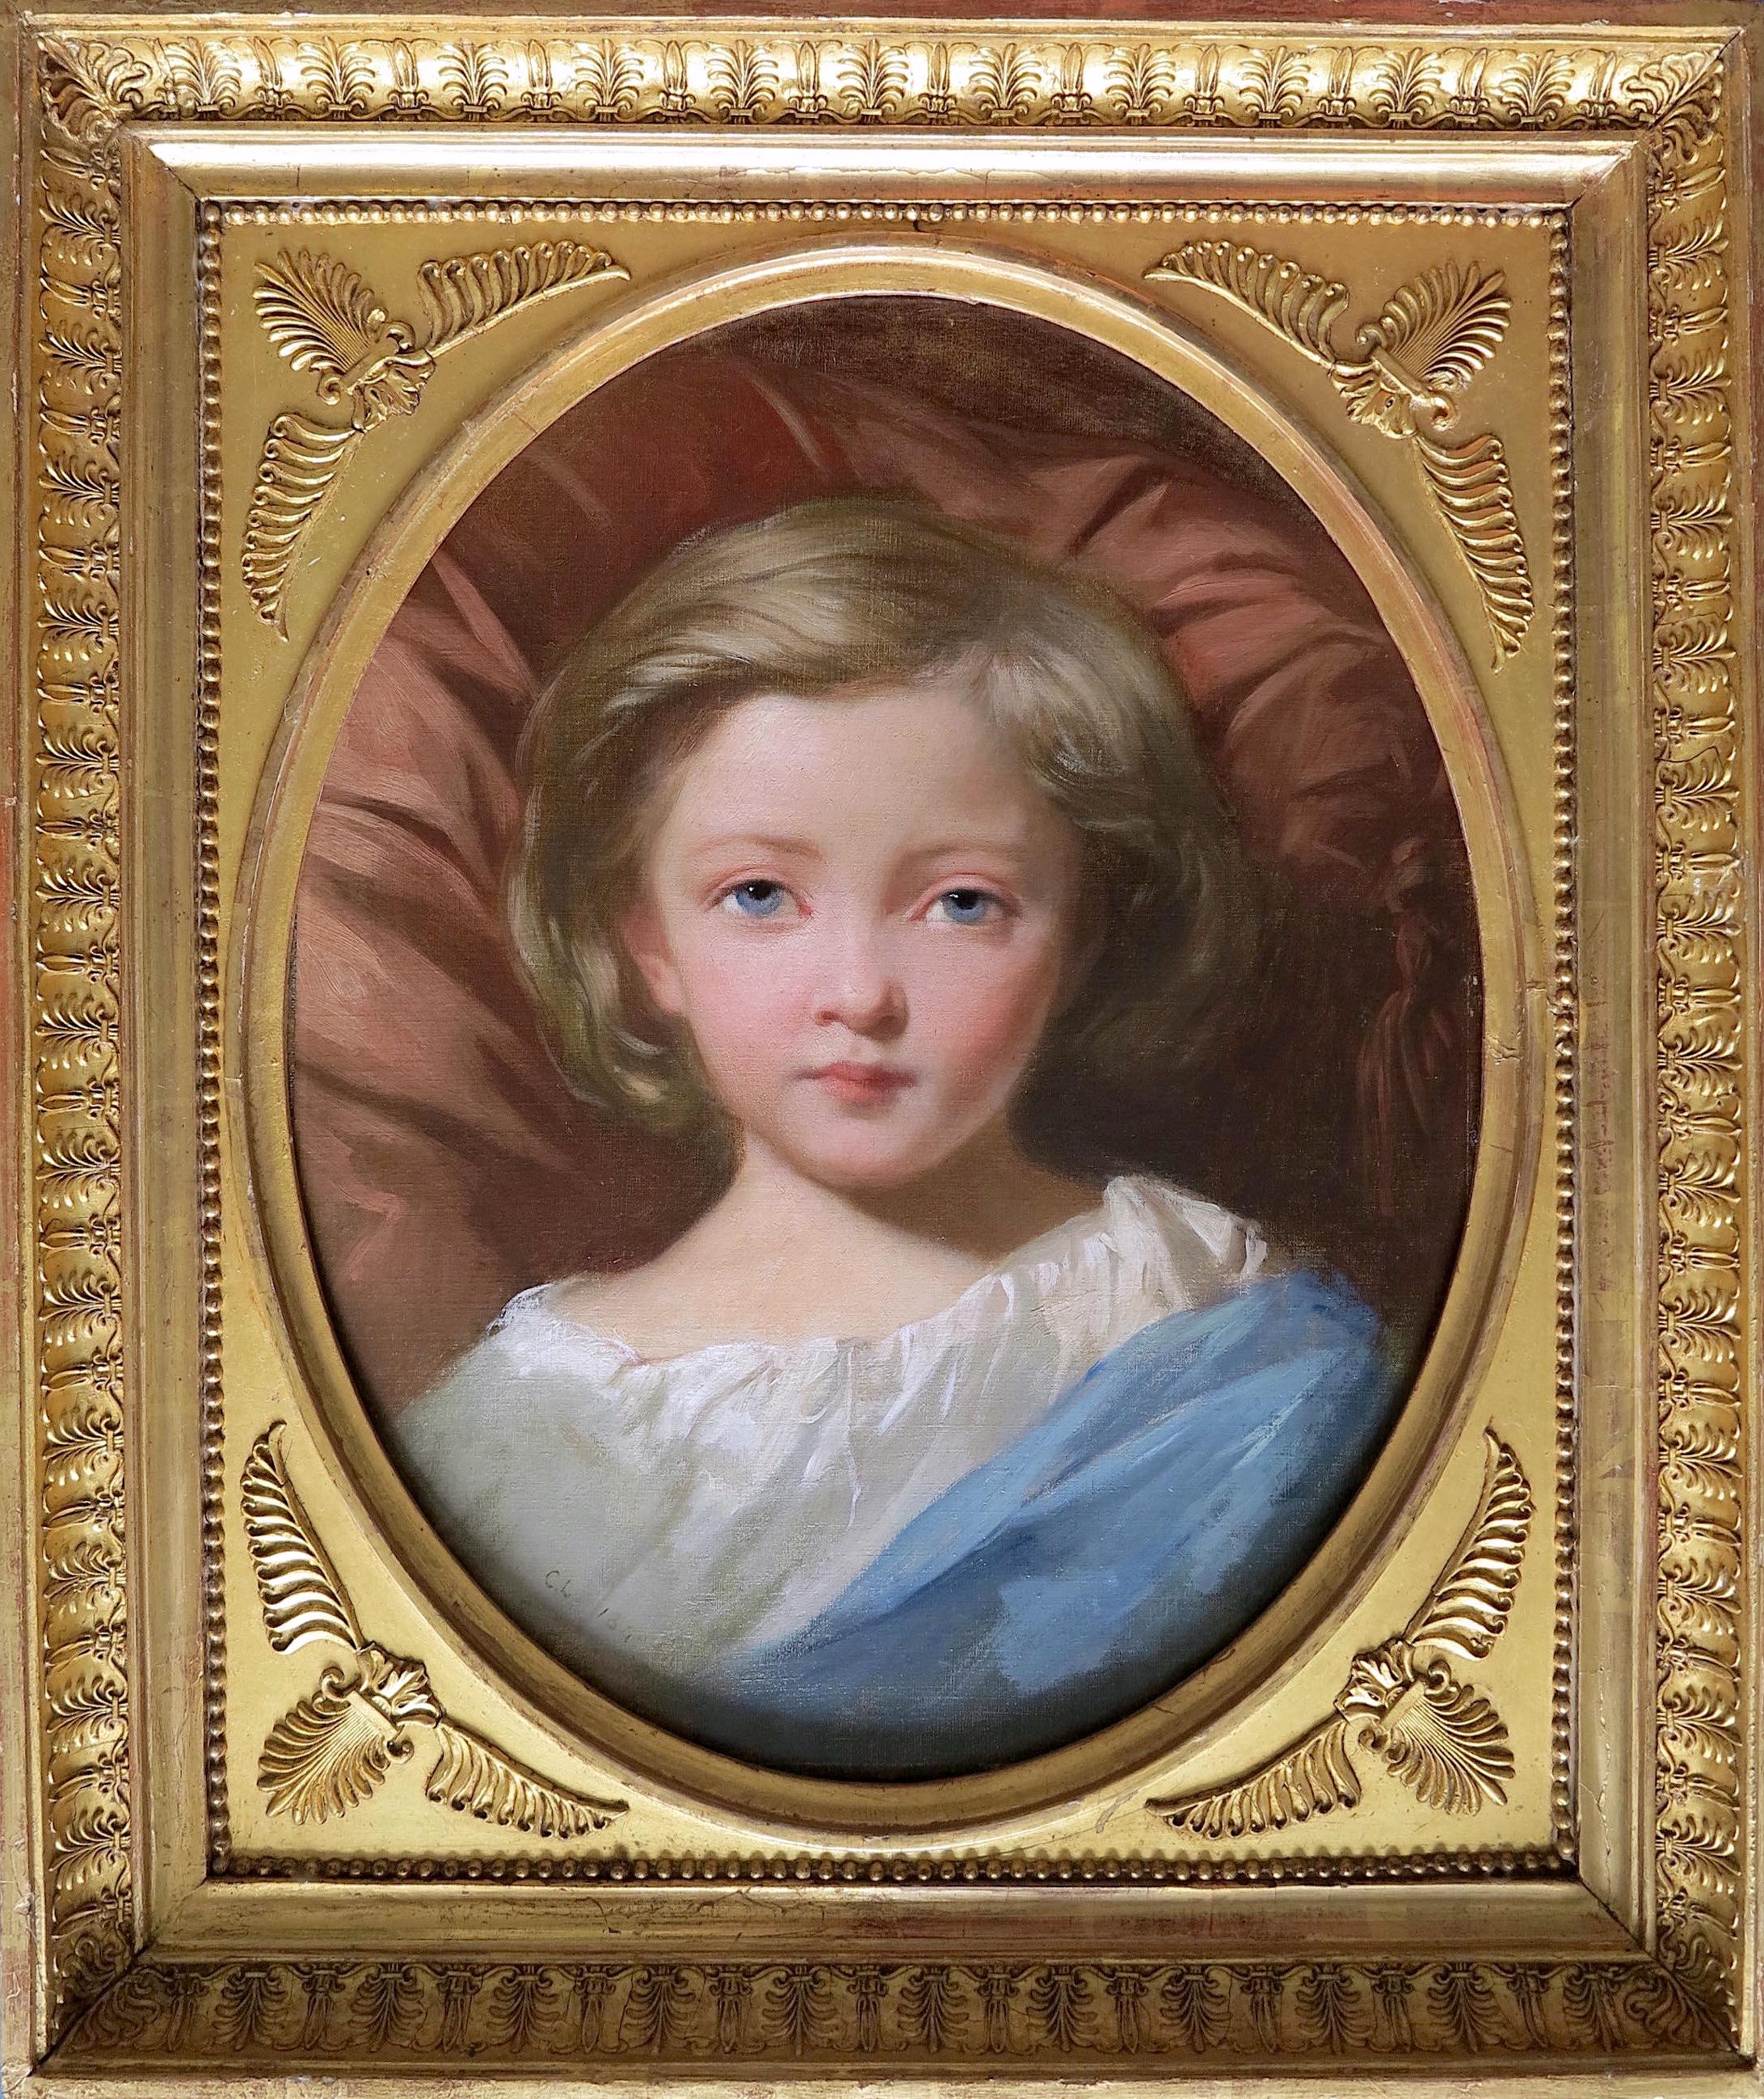 Portrait of a child with blue eyes